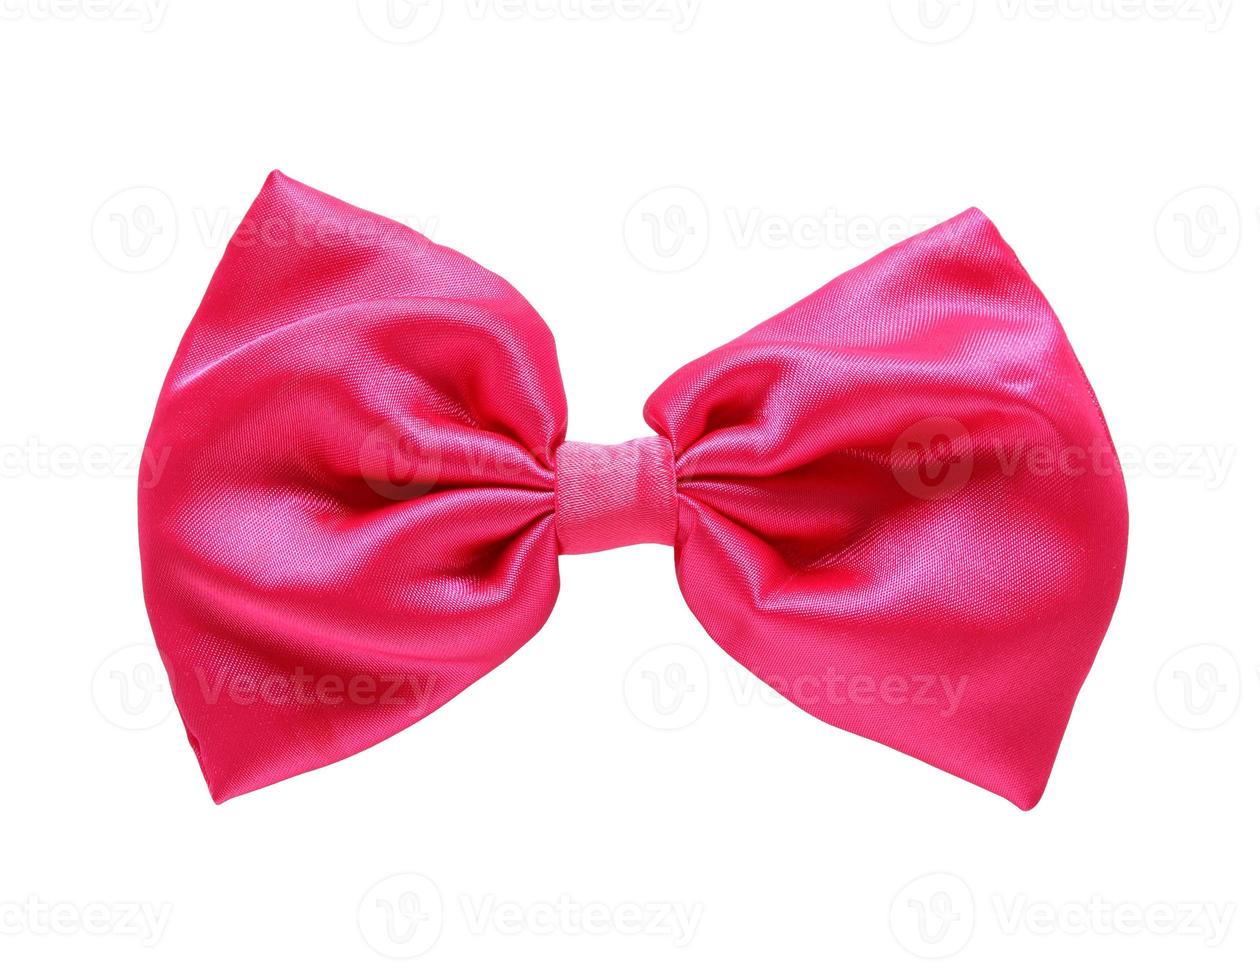 Red satin gift bow. Ribbon. Isolated on white with clipping path photo